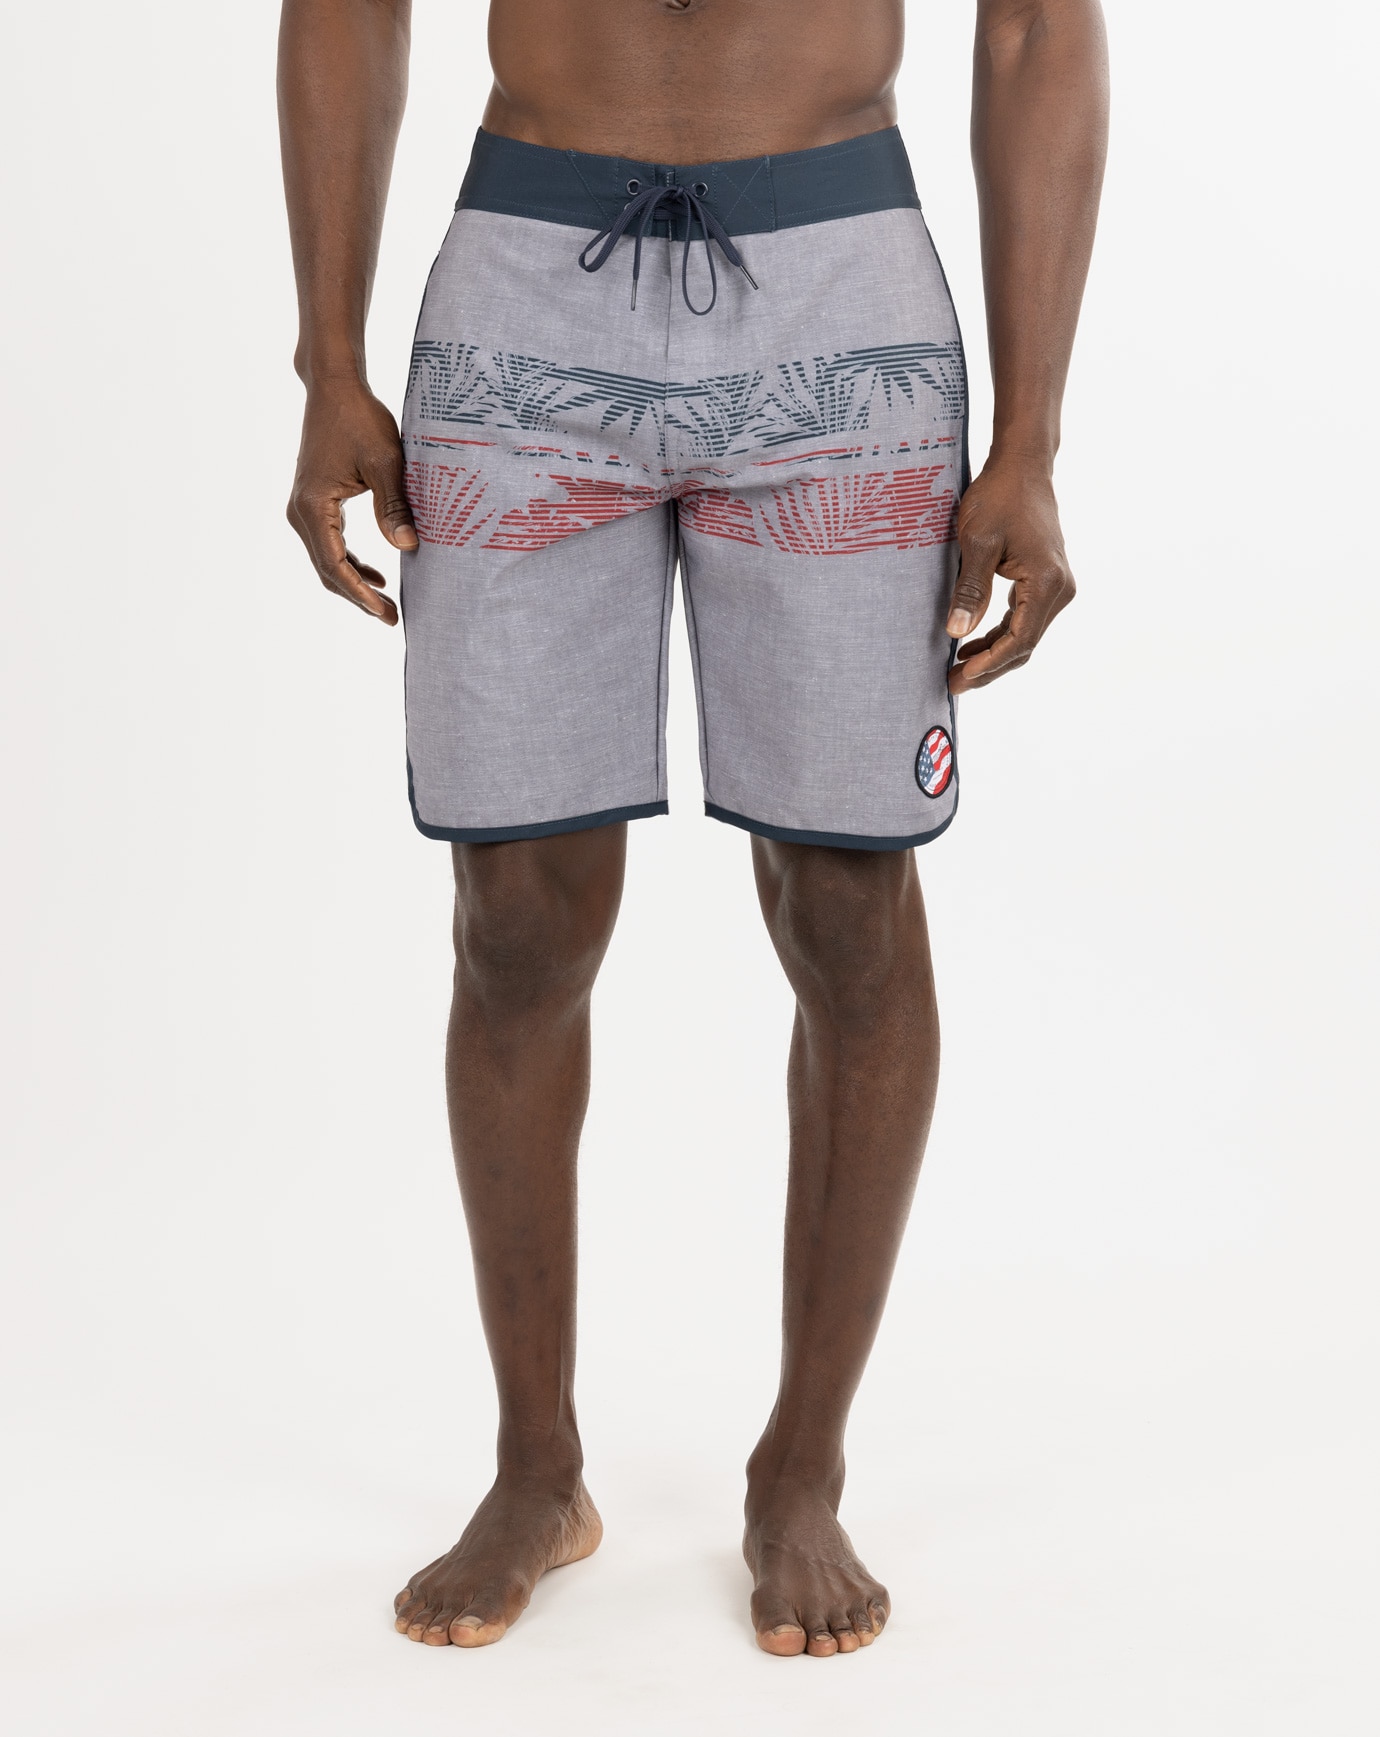 Related Product - CUTTING CORNERS BOARDSHORT